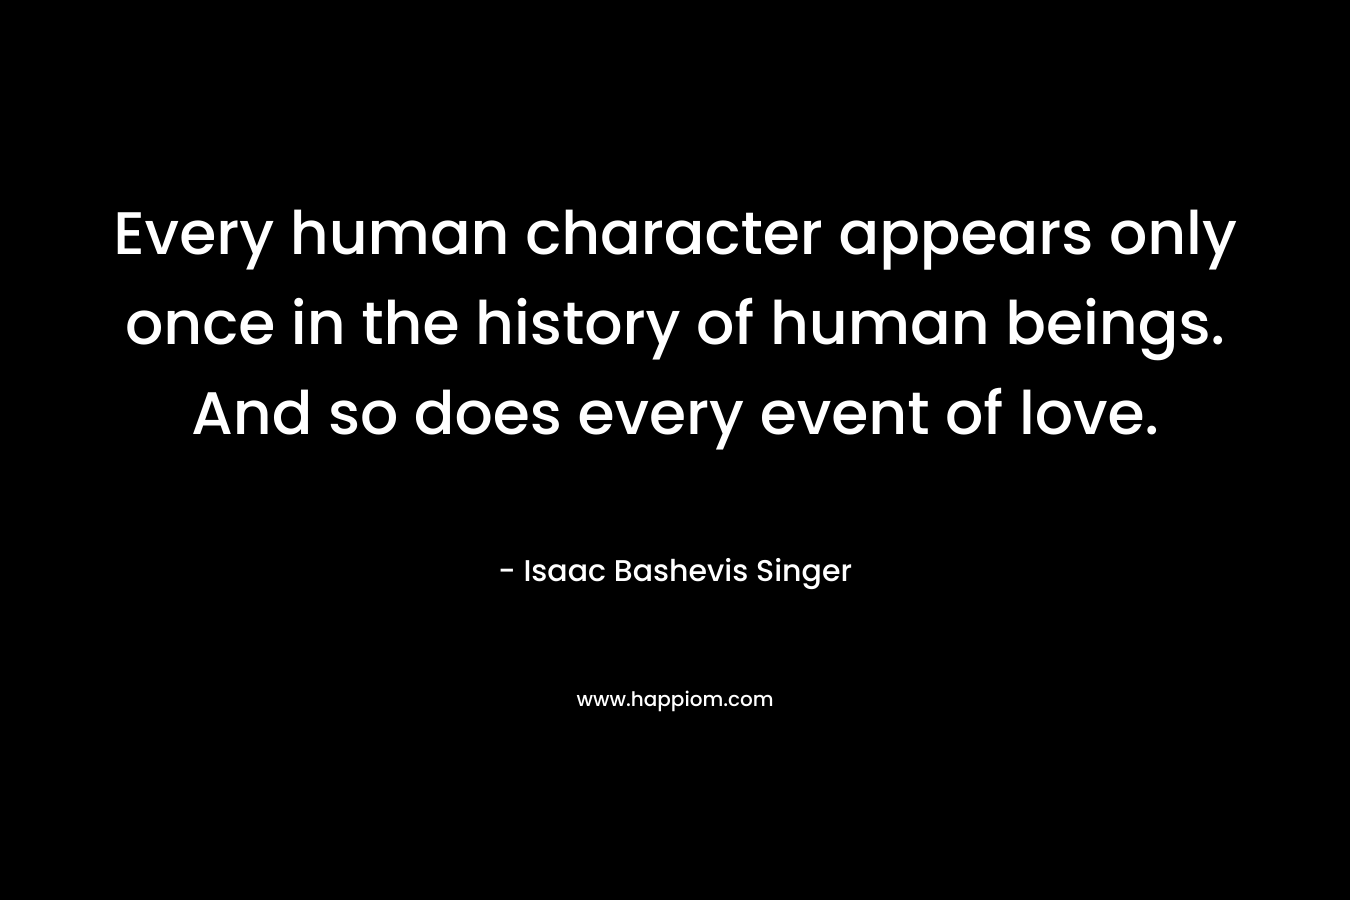 Every human character appears only once in the history of human beings. And so does every event of love.